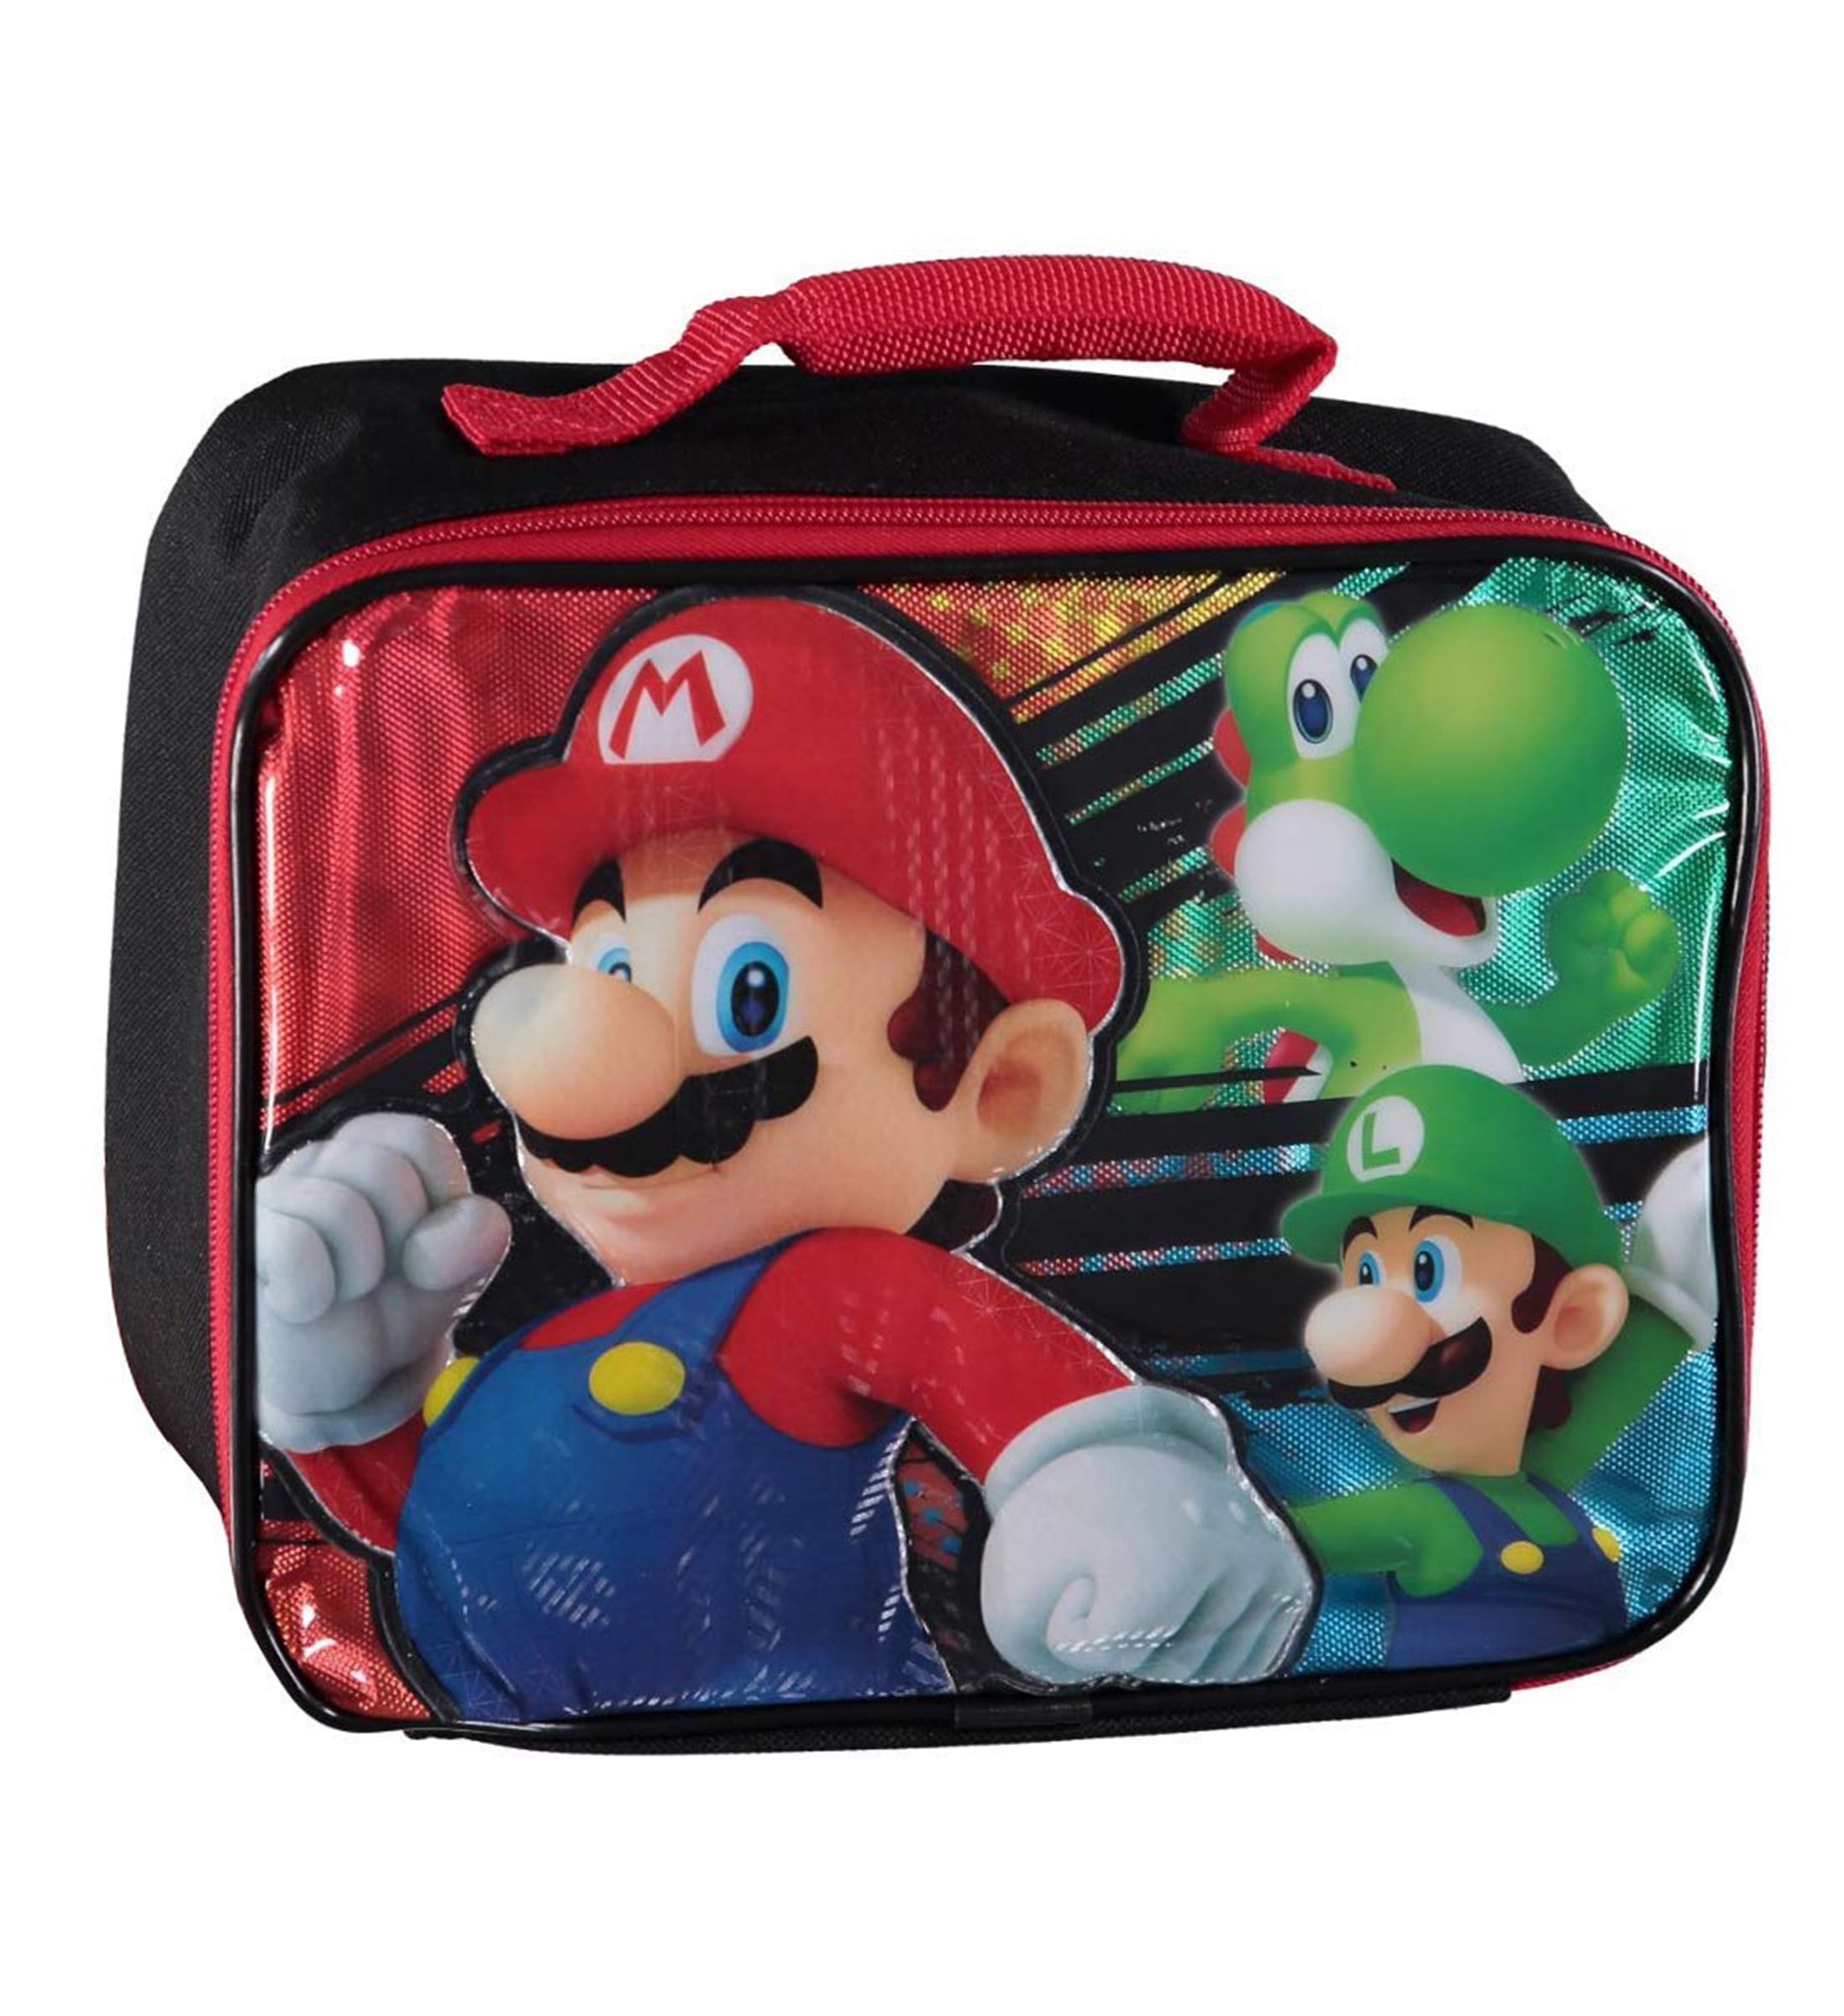 Kids Lunch Bag Nintendo Super Mario 3D Character BPA Free Insulated Pack 